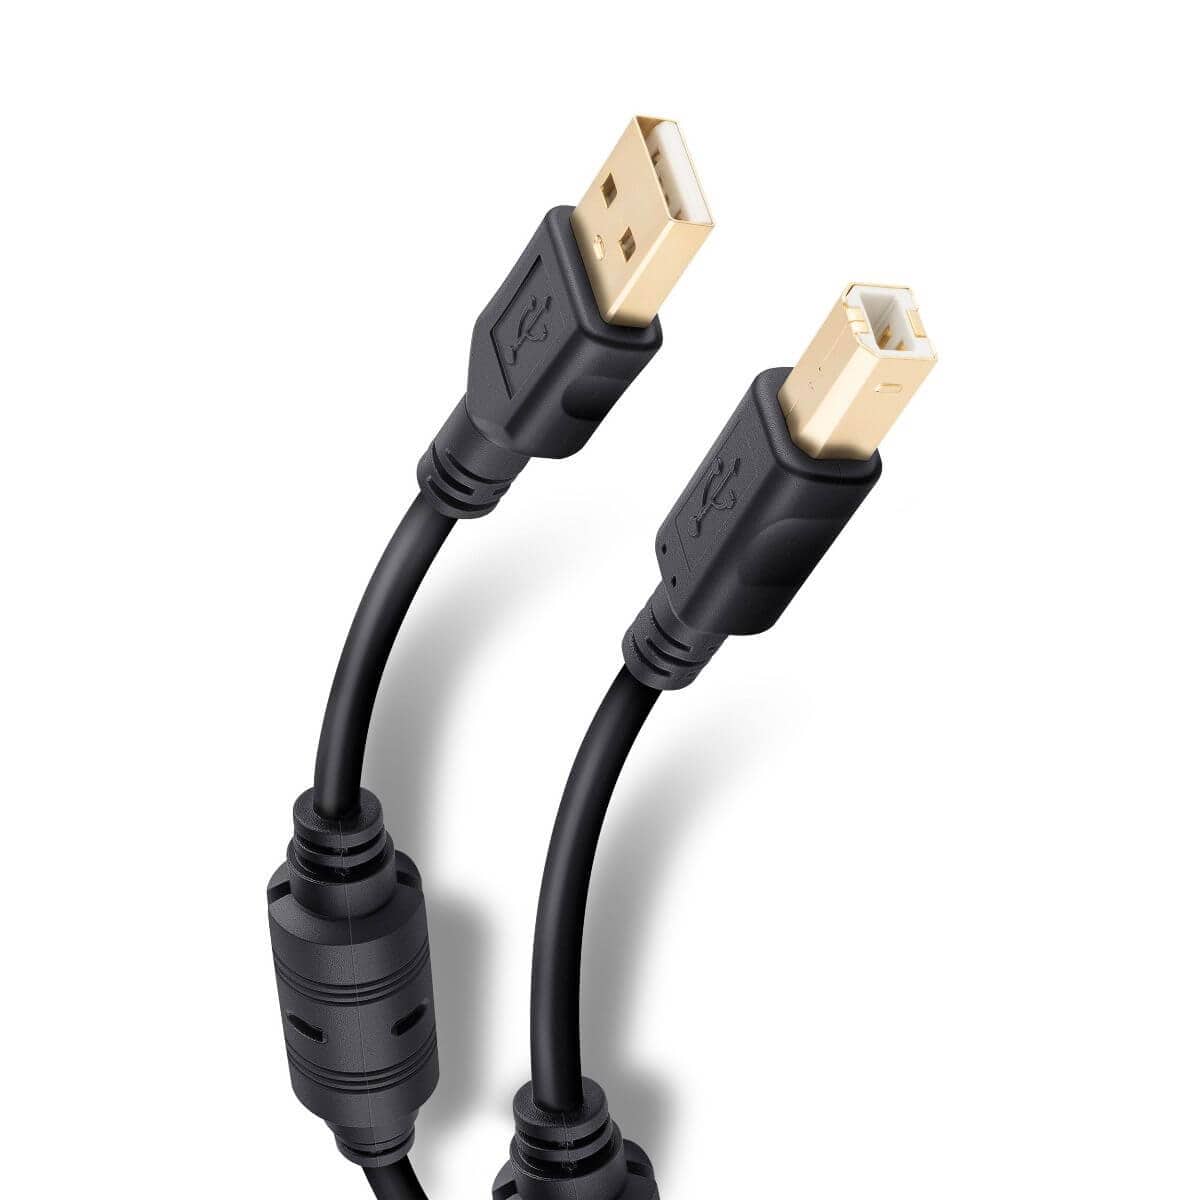 USB Cable for simracing button box